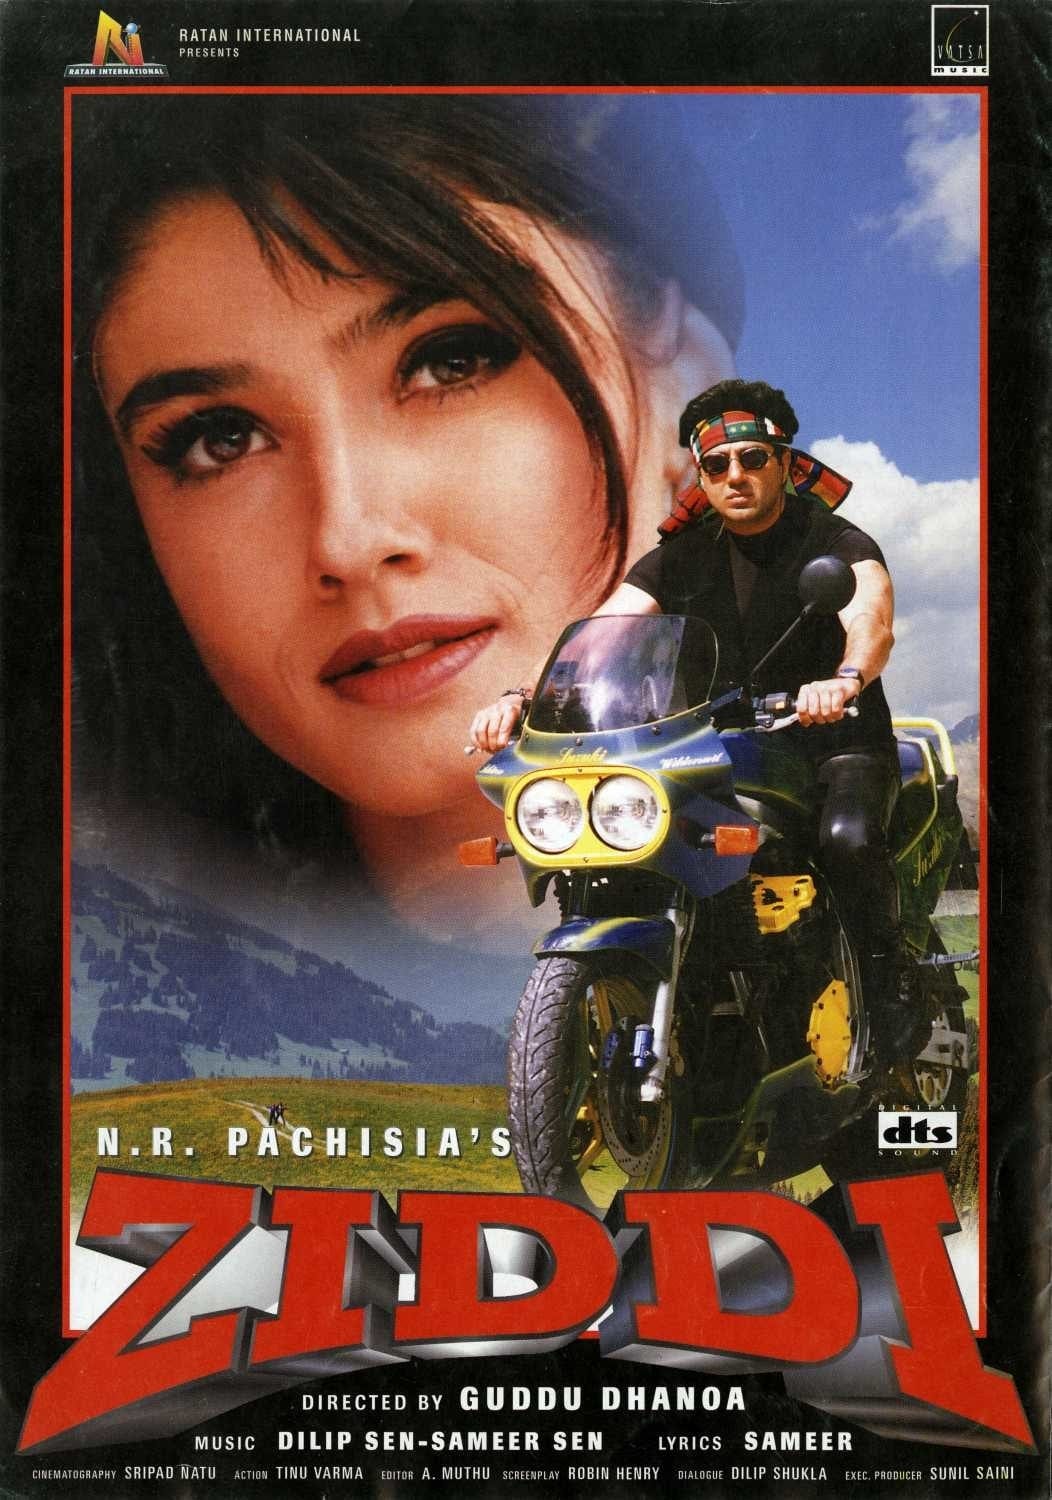 Poster for the movie "Ziddi"